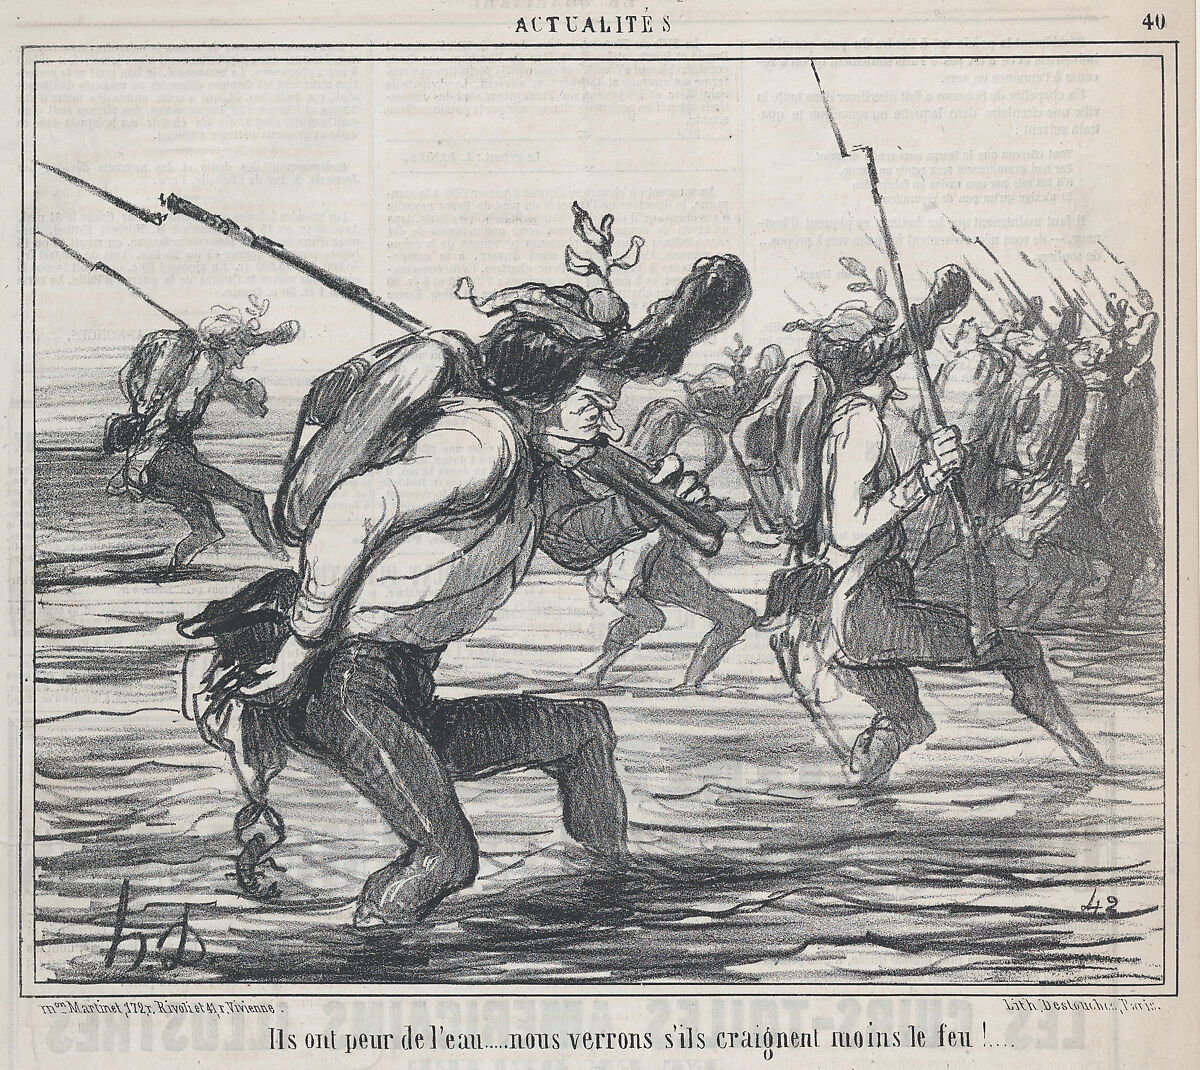 Ils ont peur de l'eau..., from Actualités, published in Le Charivari, May 11, 1859, Honoré Daumier (French, Marseilles 1808–1879 Valmondois), Lithograph on newsprint; first state of two (Hazard & Delteil) 